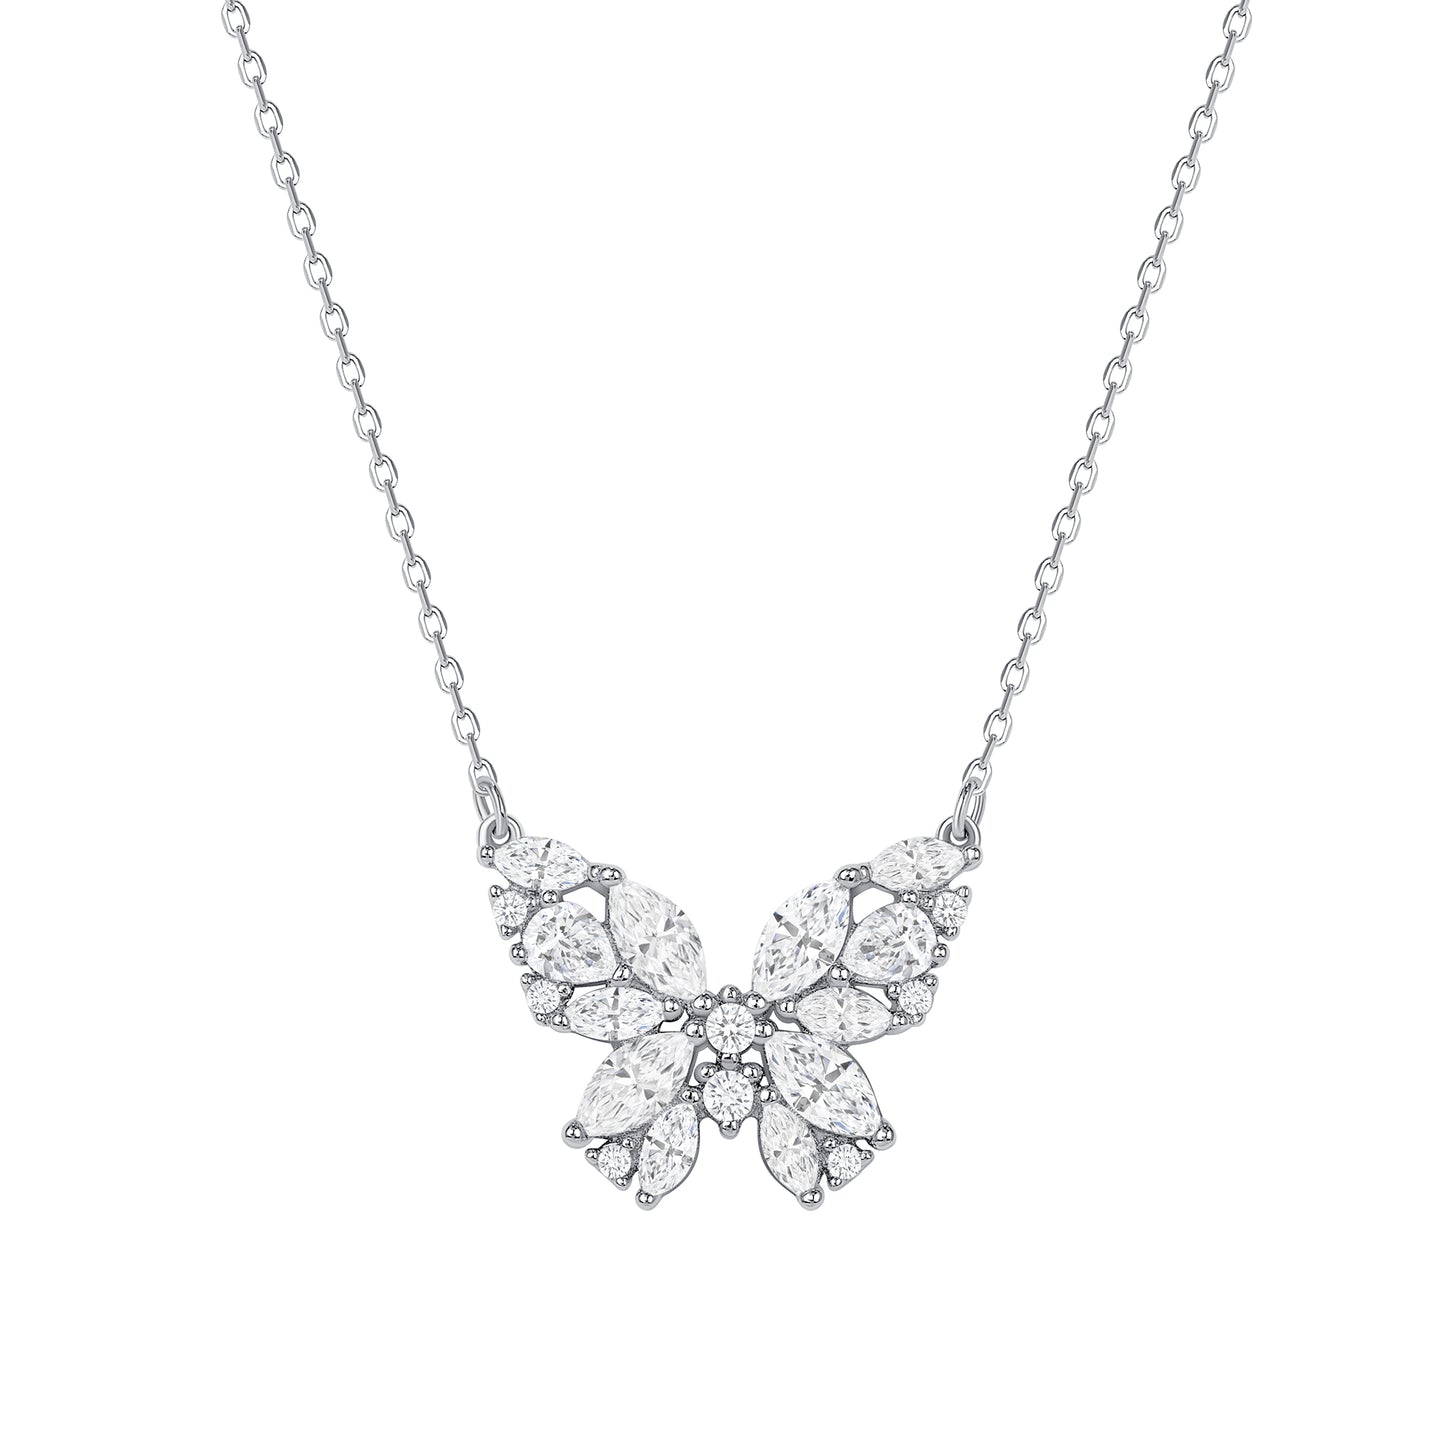 BN3969CLR. Silver 925 Clear Cubic Zirconia Butterfly Necklace. BN3969CLR